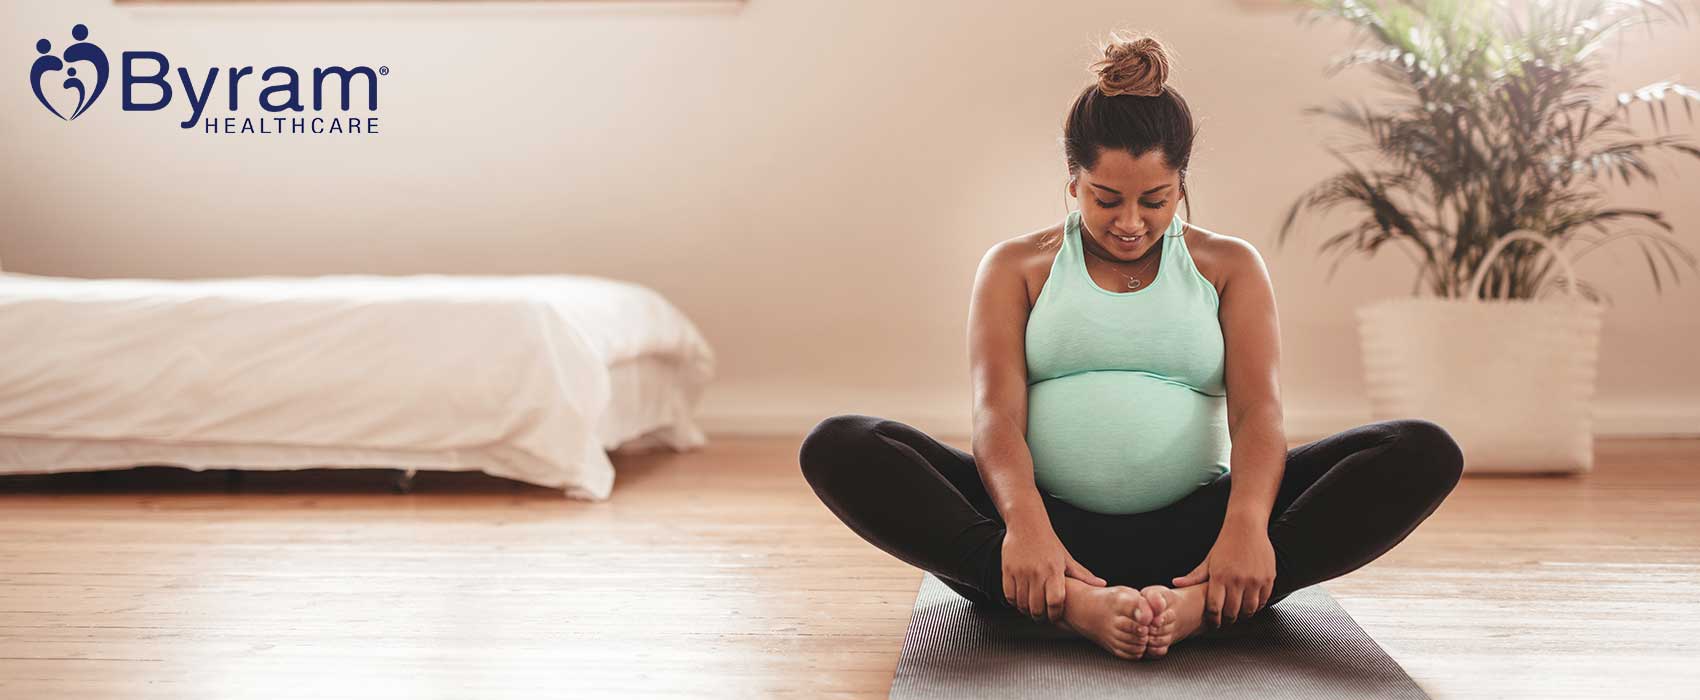 Pregnant woman stretching to prepare for childbirth.